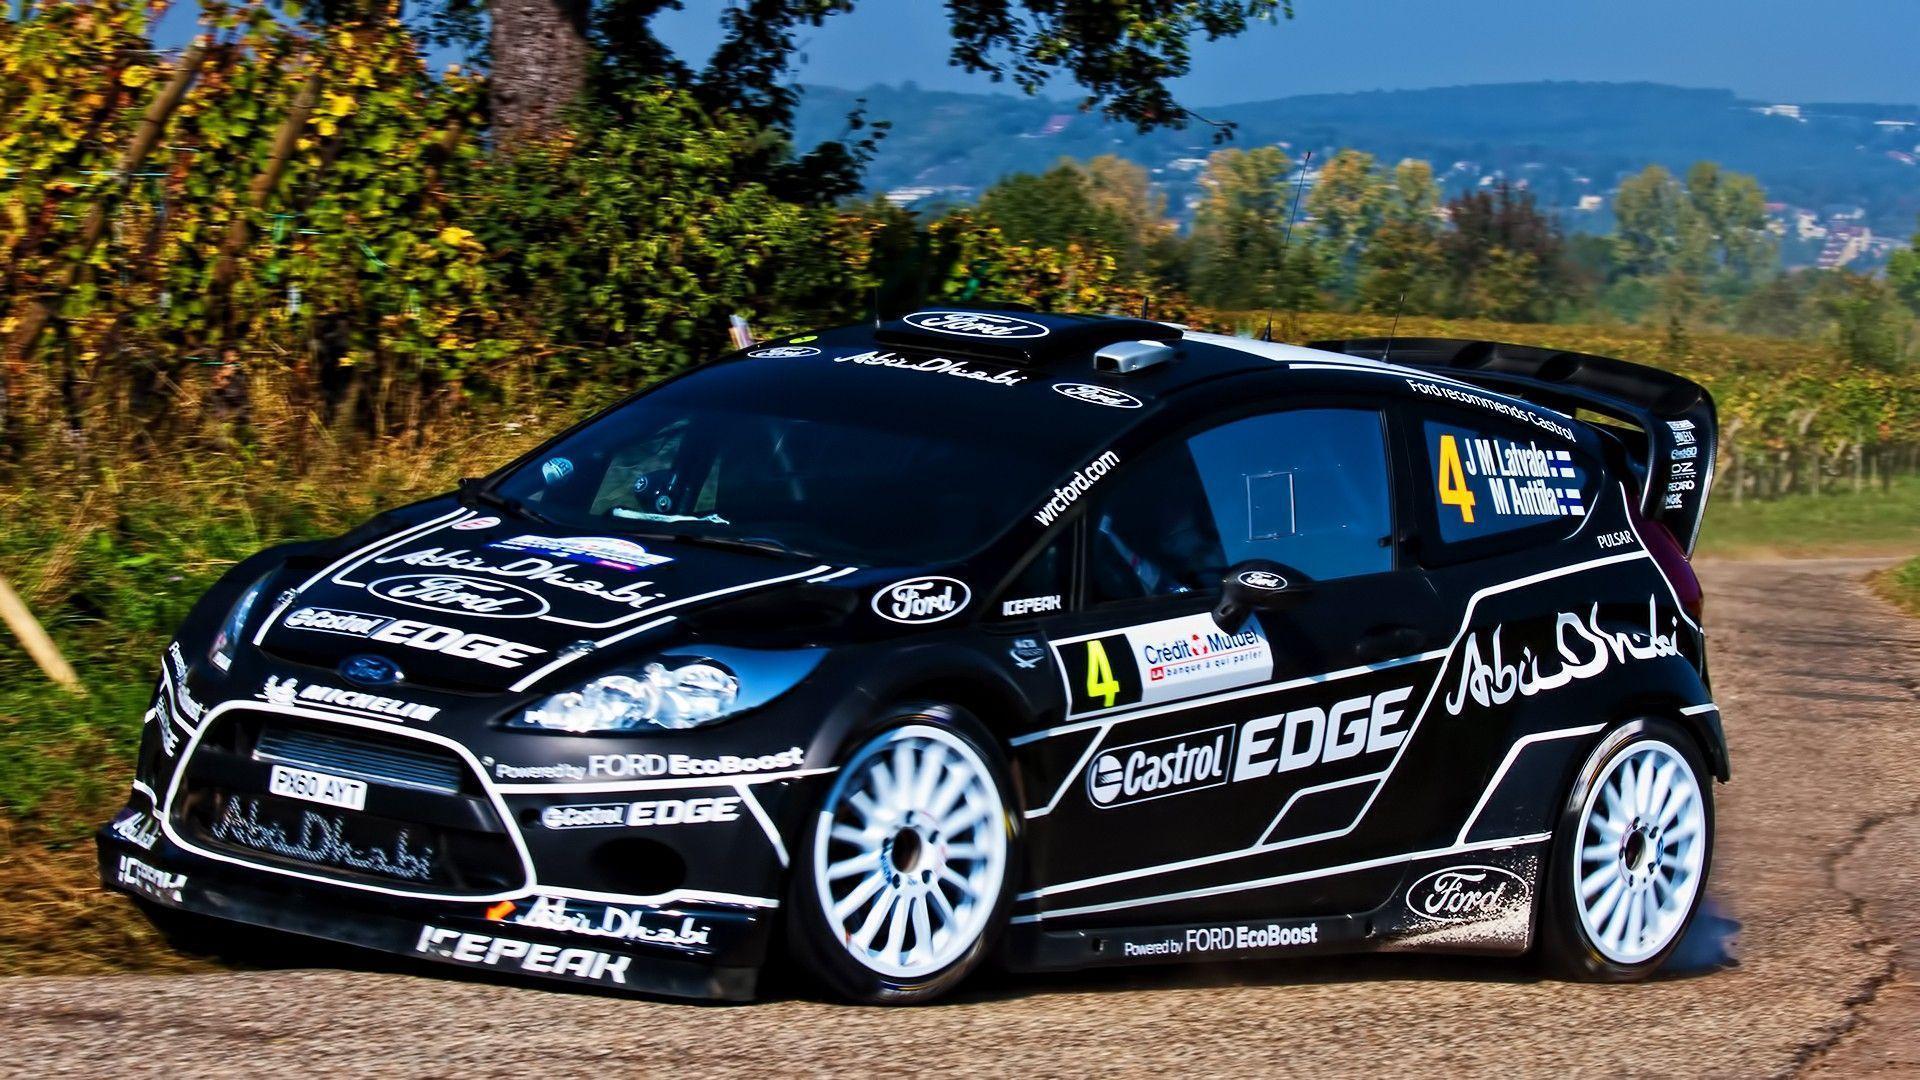 Ford Fiesta RS, Wrc, Race Cars Wallpaper HD / Desktop and Mobile